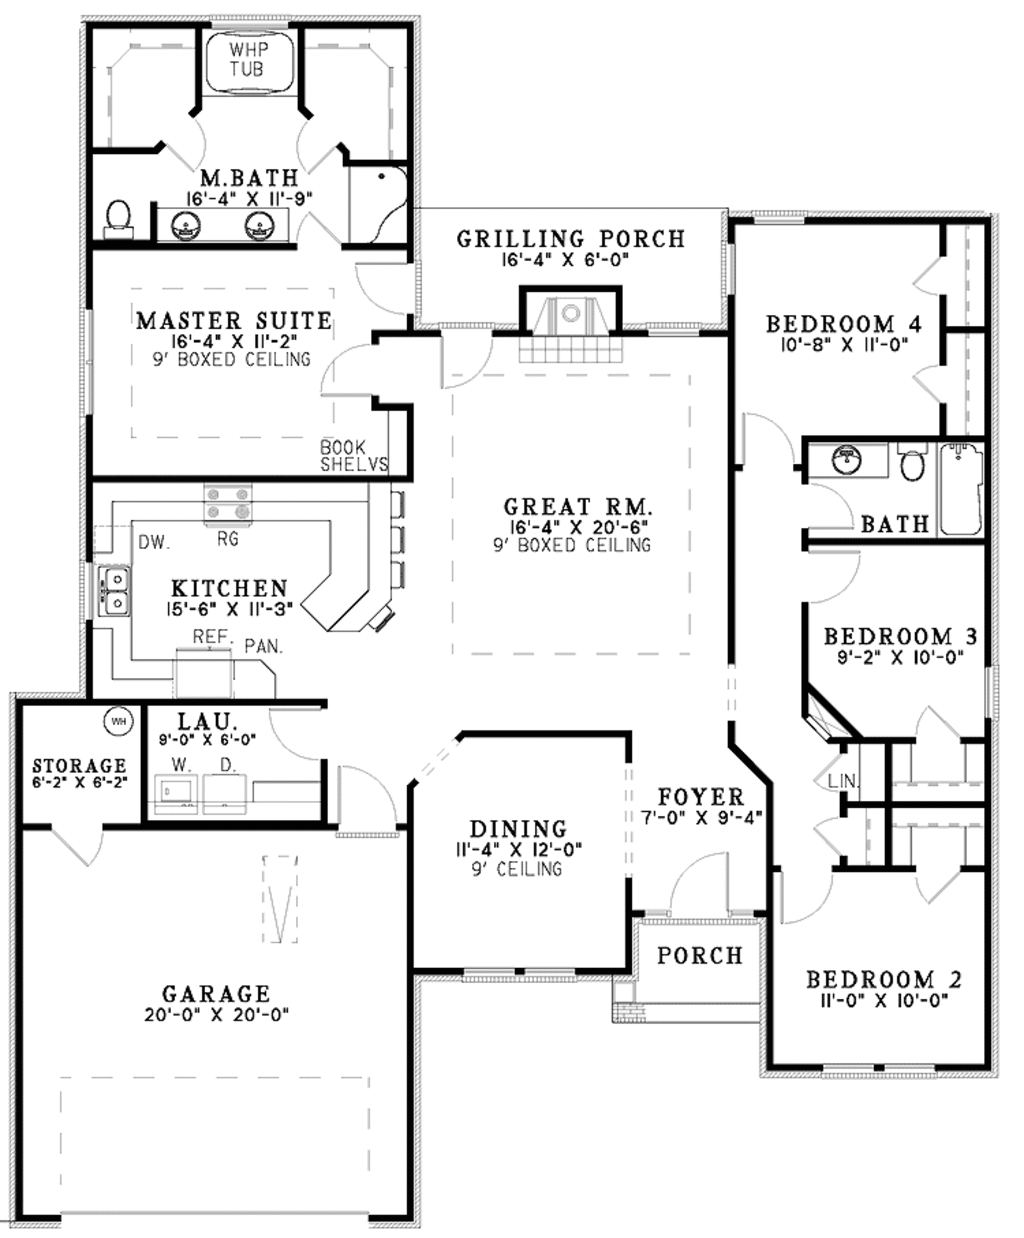 ranch-style-house-plan-4-beds-2-baths-1832-sq-ft-plan-17-3179